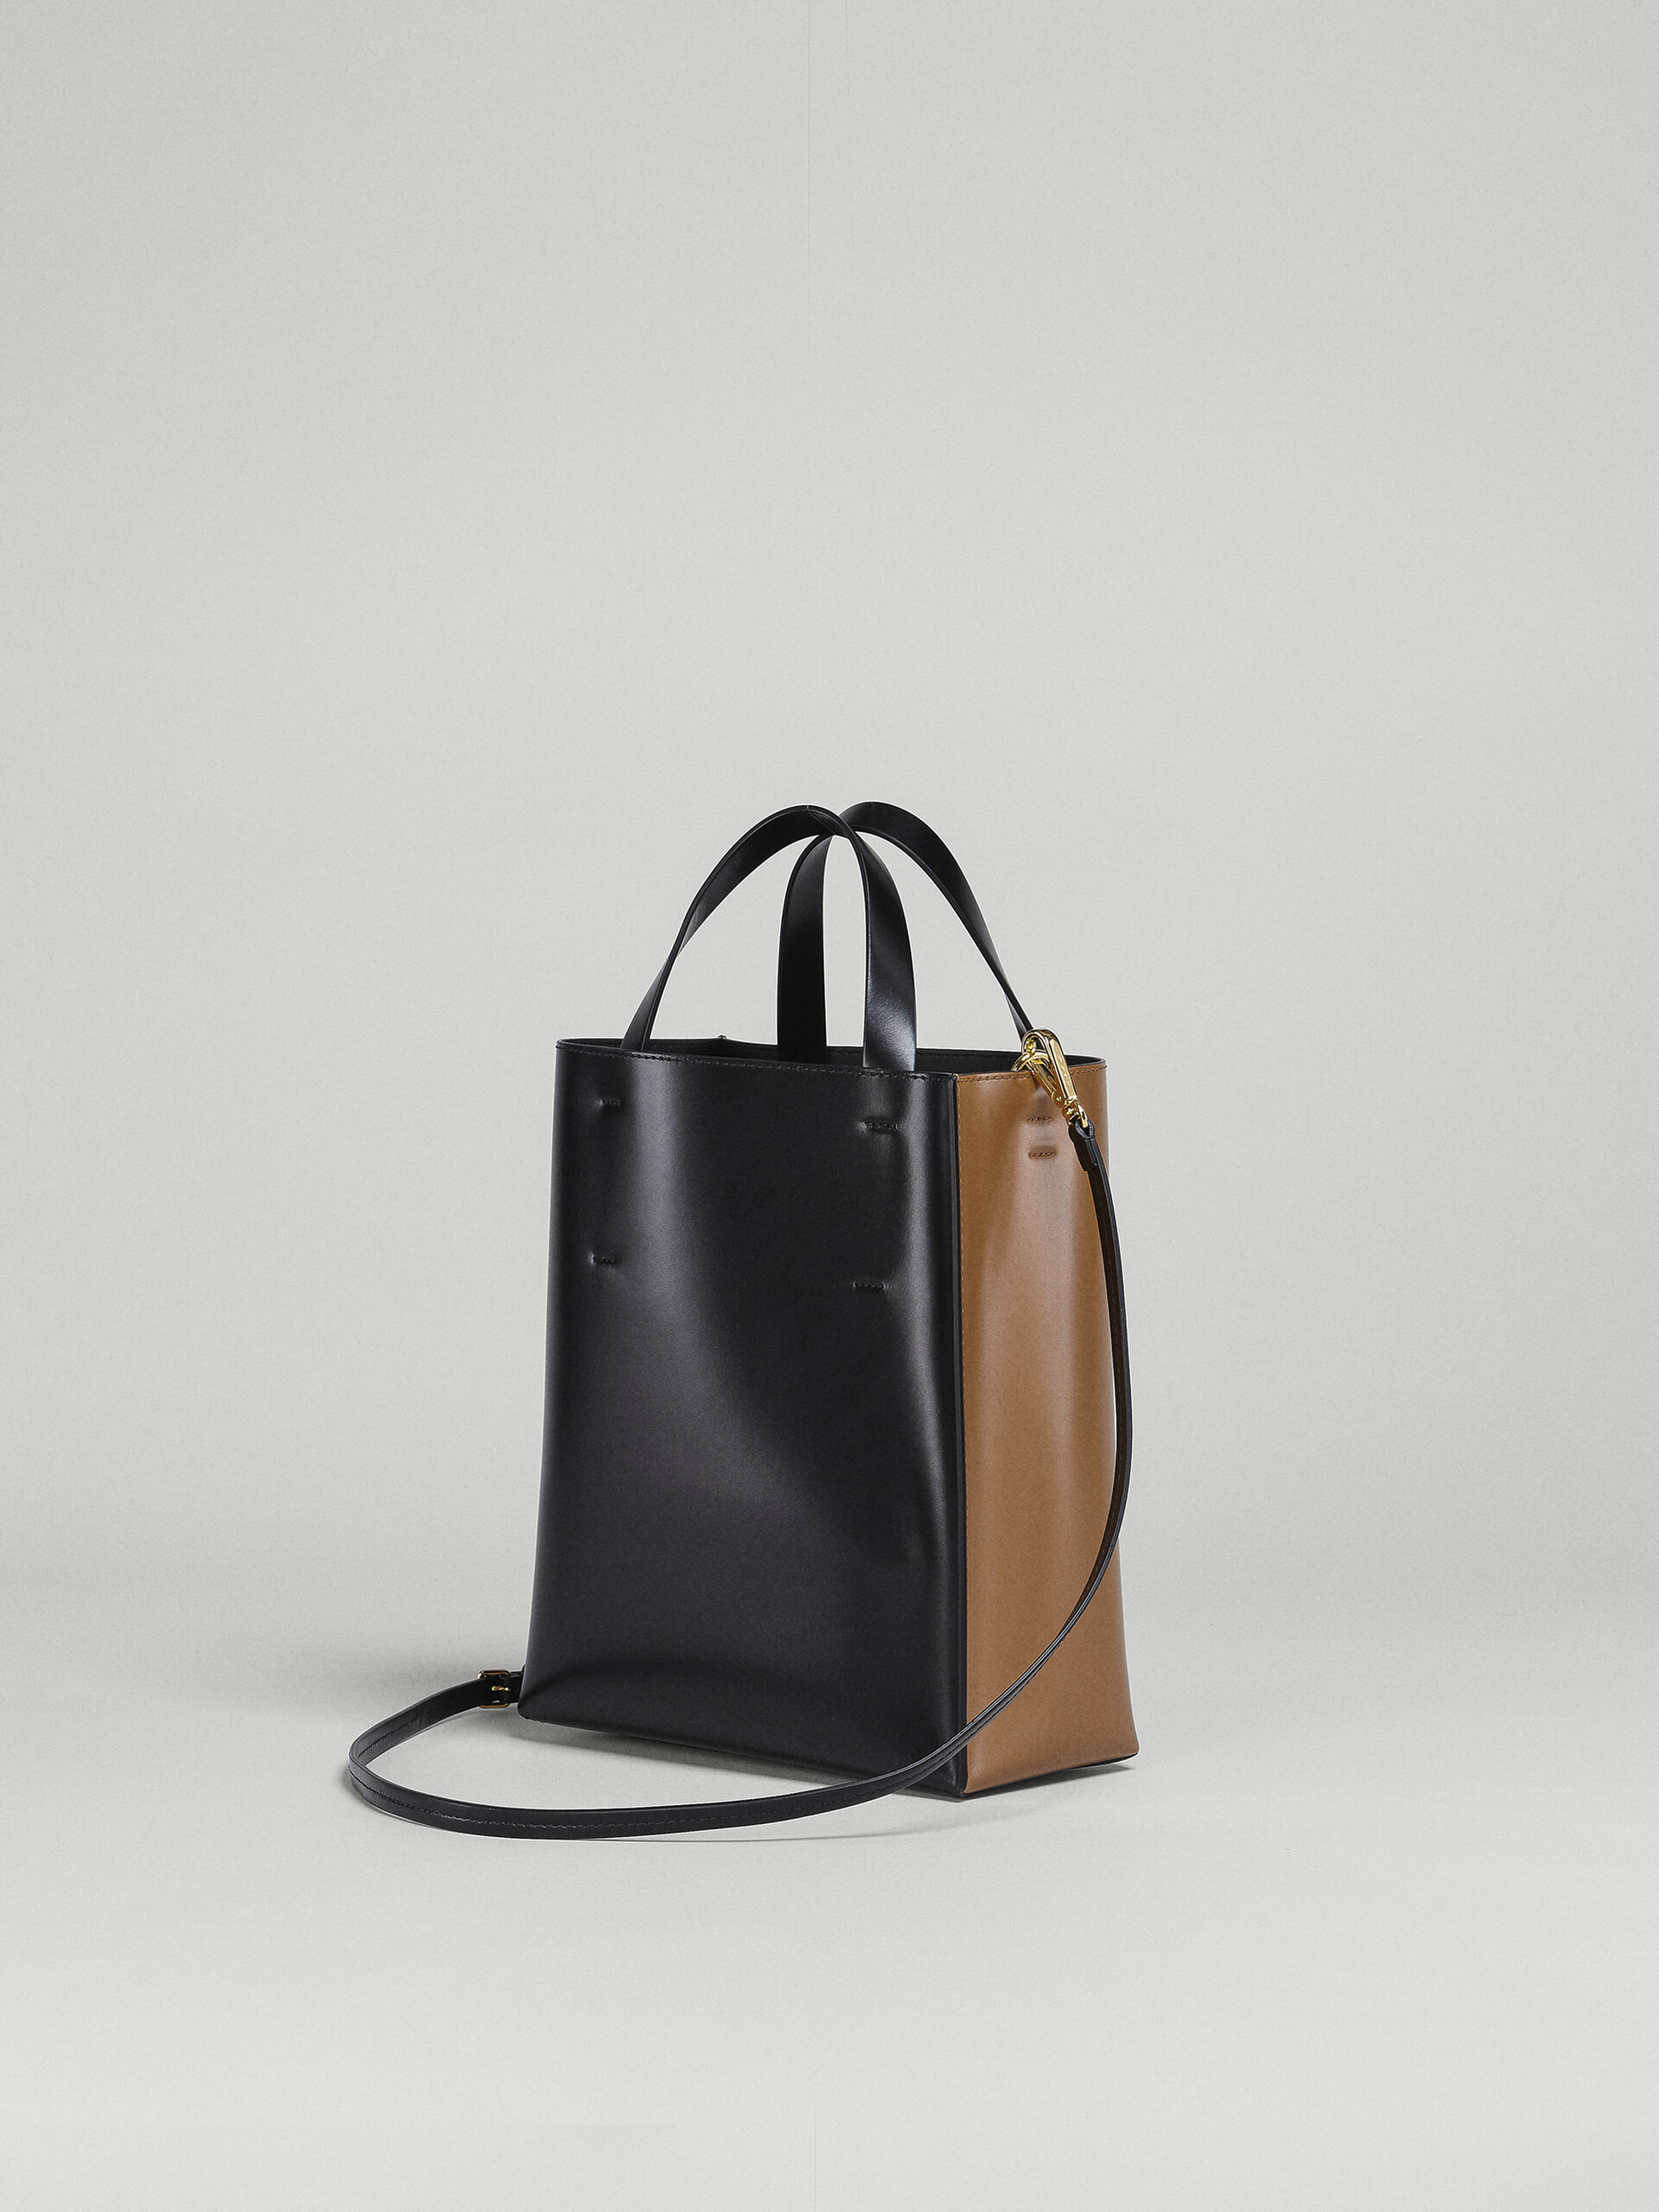 MUSEO small bag in brown and black leather - Shopping Bags - Image 3